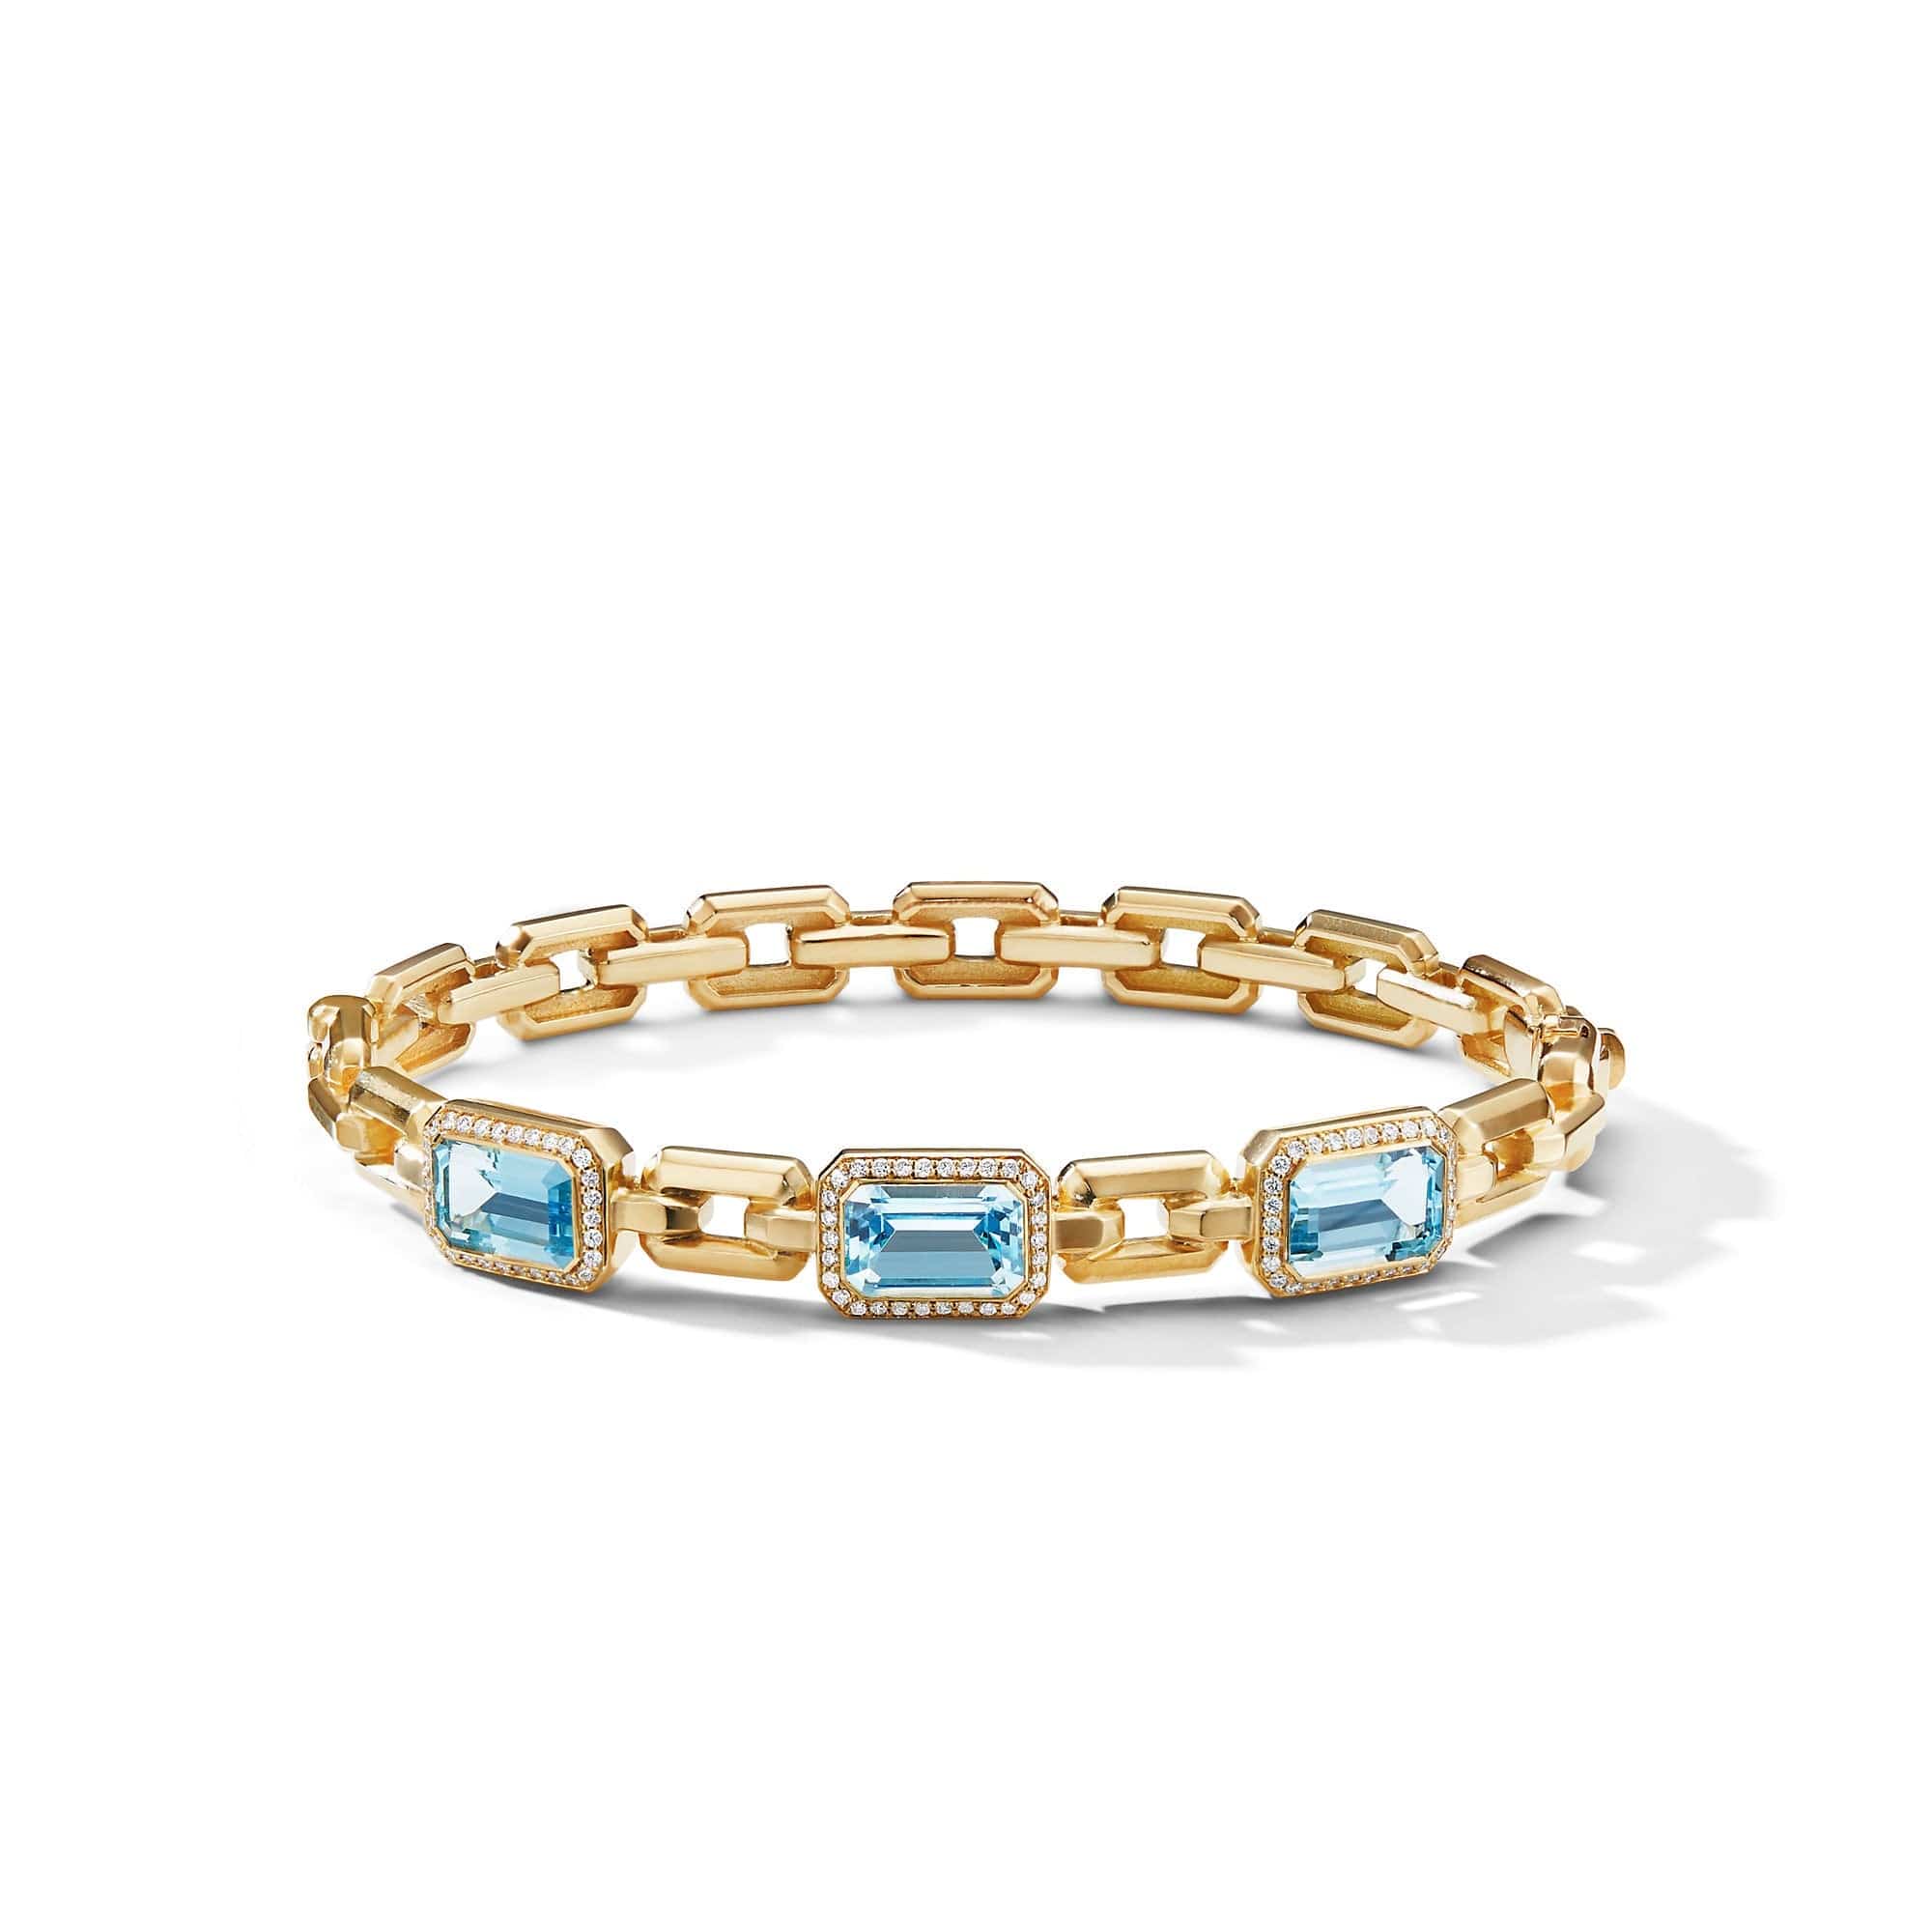 Novella Three Stone Bracelet in 18K Yellow Gold with Blue Topaz and Diamonds, Long's Jewelers